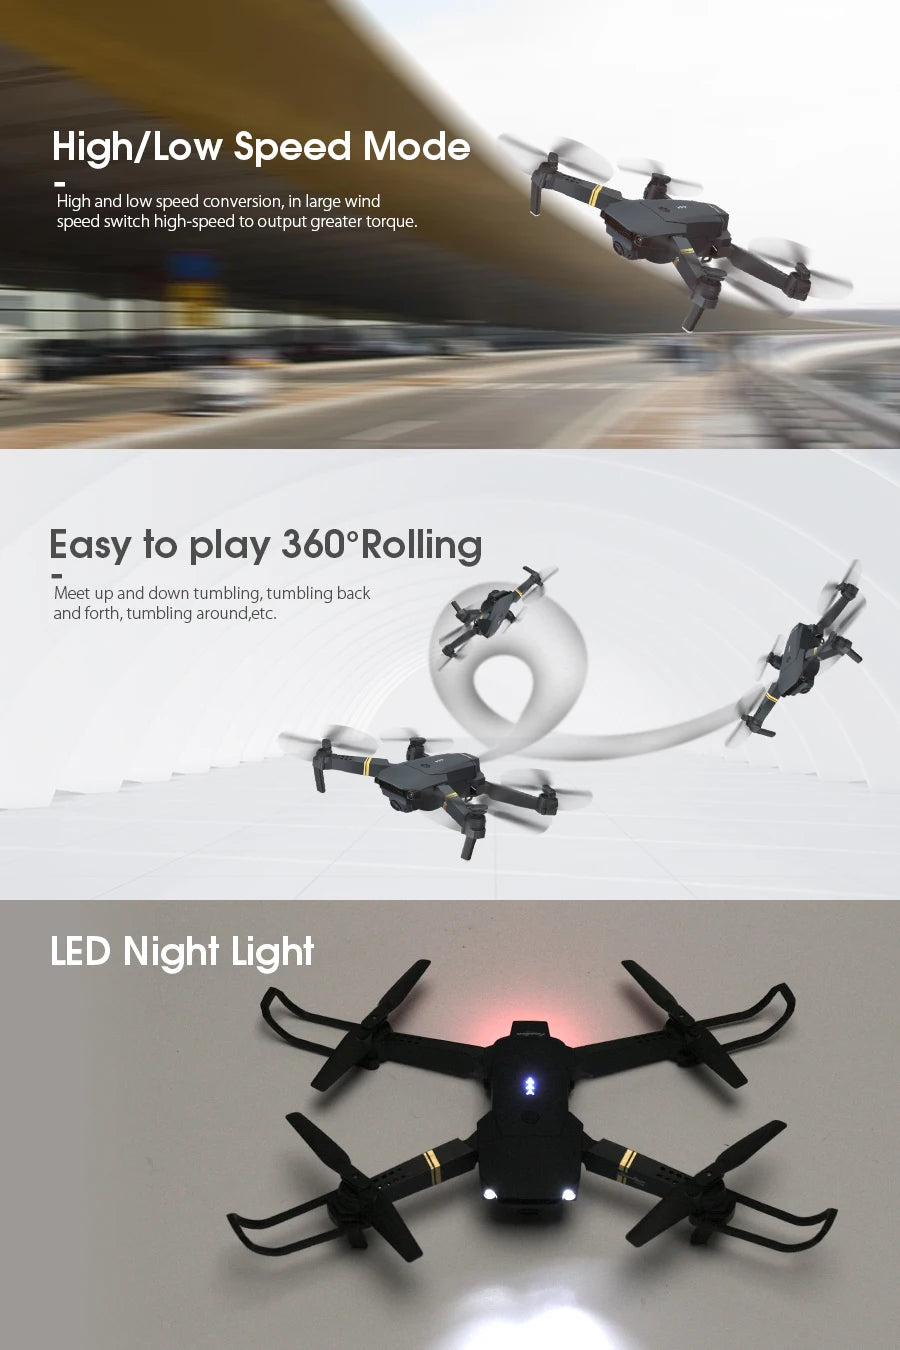 Eachine E58 Drone, high/low speed mode high and low speed conversion; in large wind